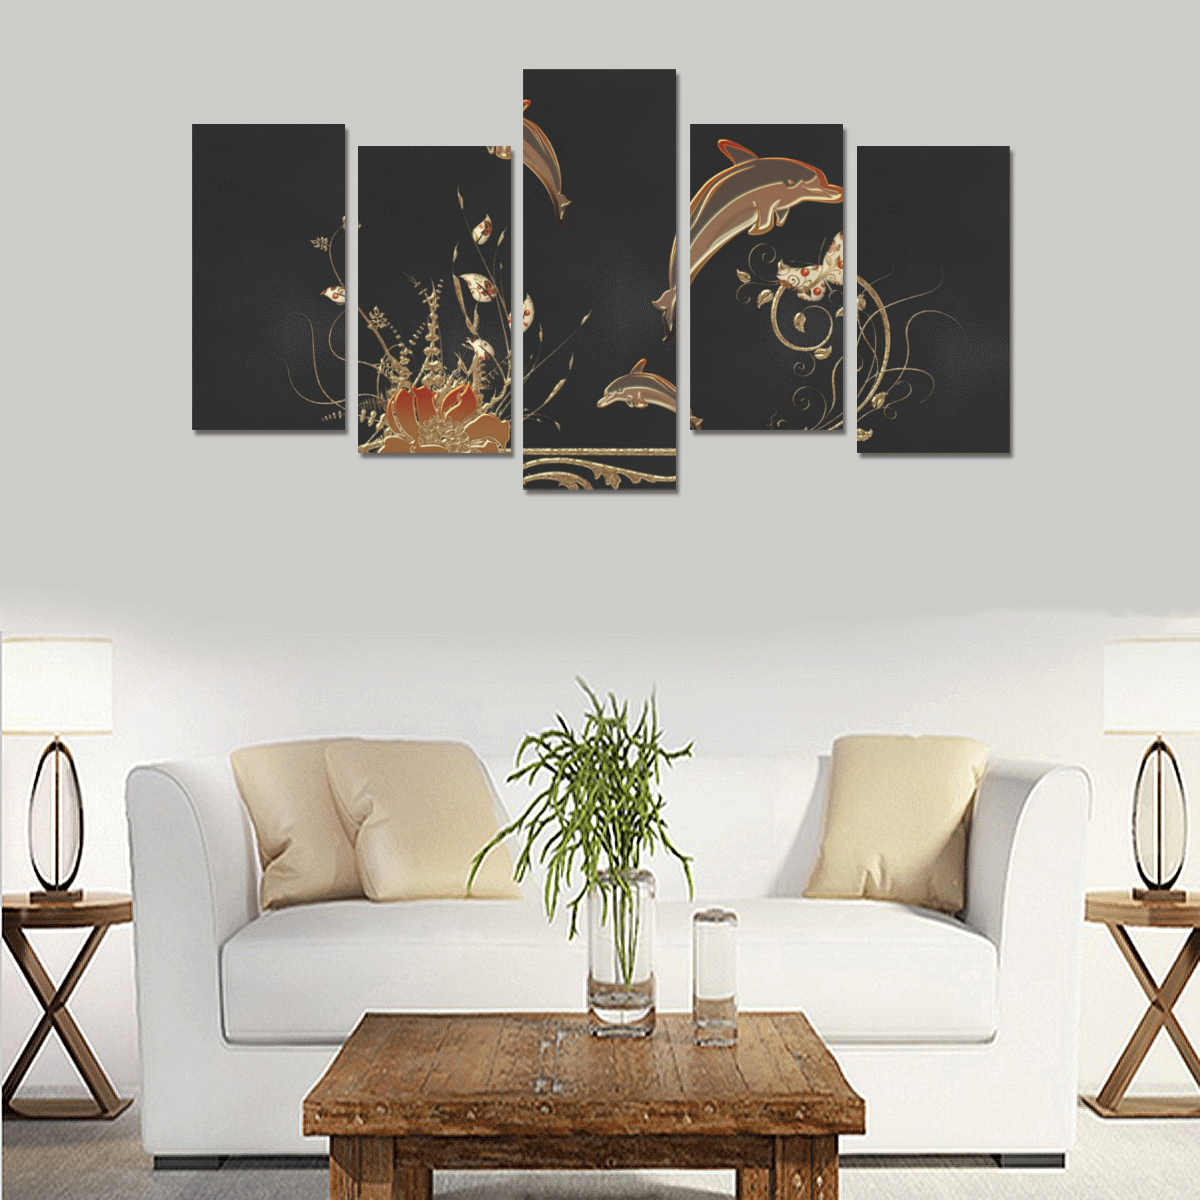 Dolphin with flowers Canvas Print Sets E (No Frame)